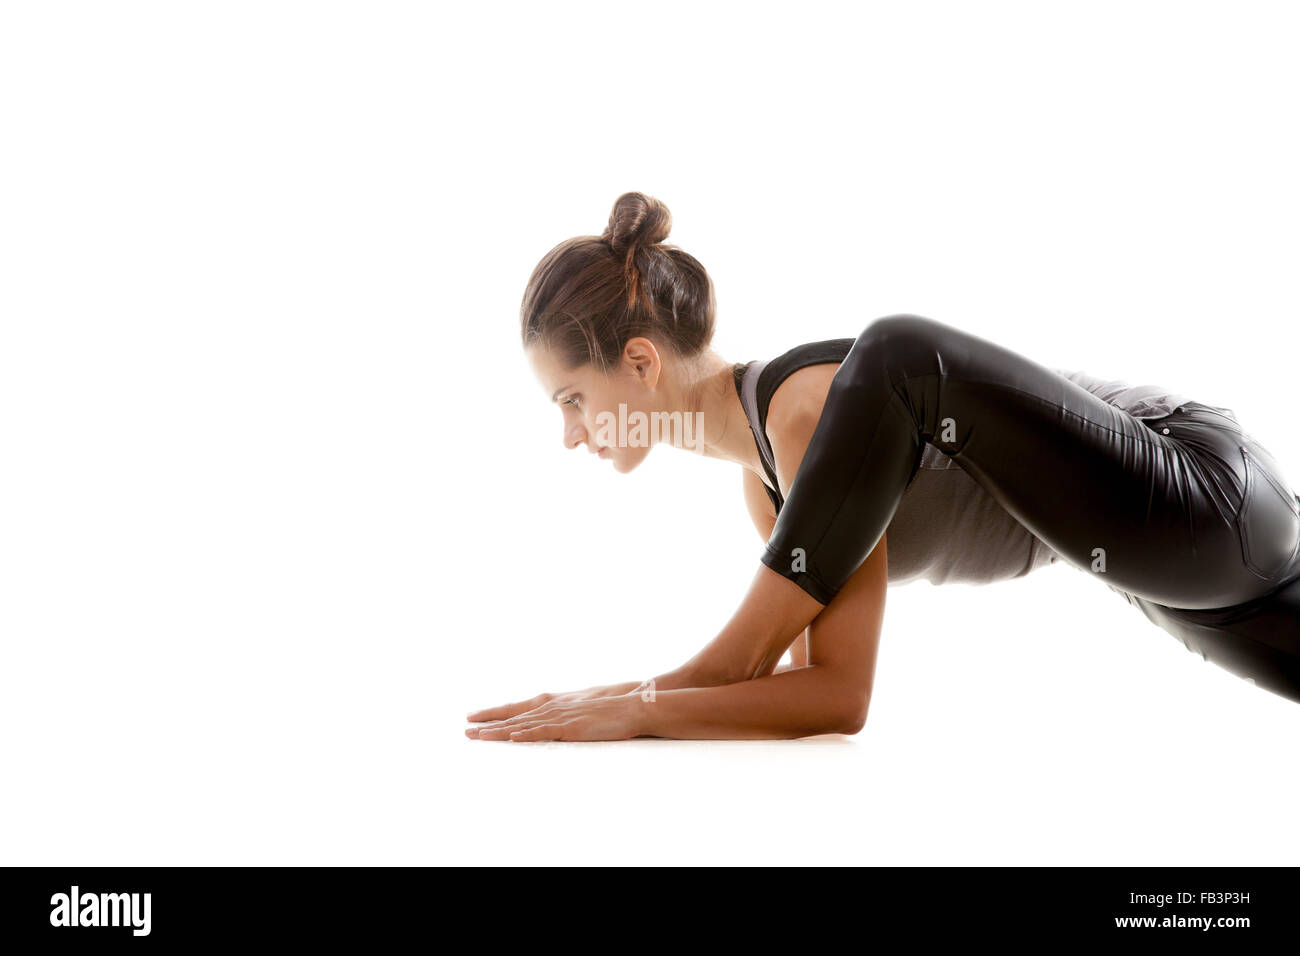 Sporty yoga girl on white background exercises, the left knee is bent over the left ankle close-up Stock Photo